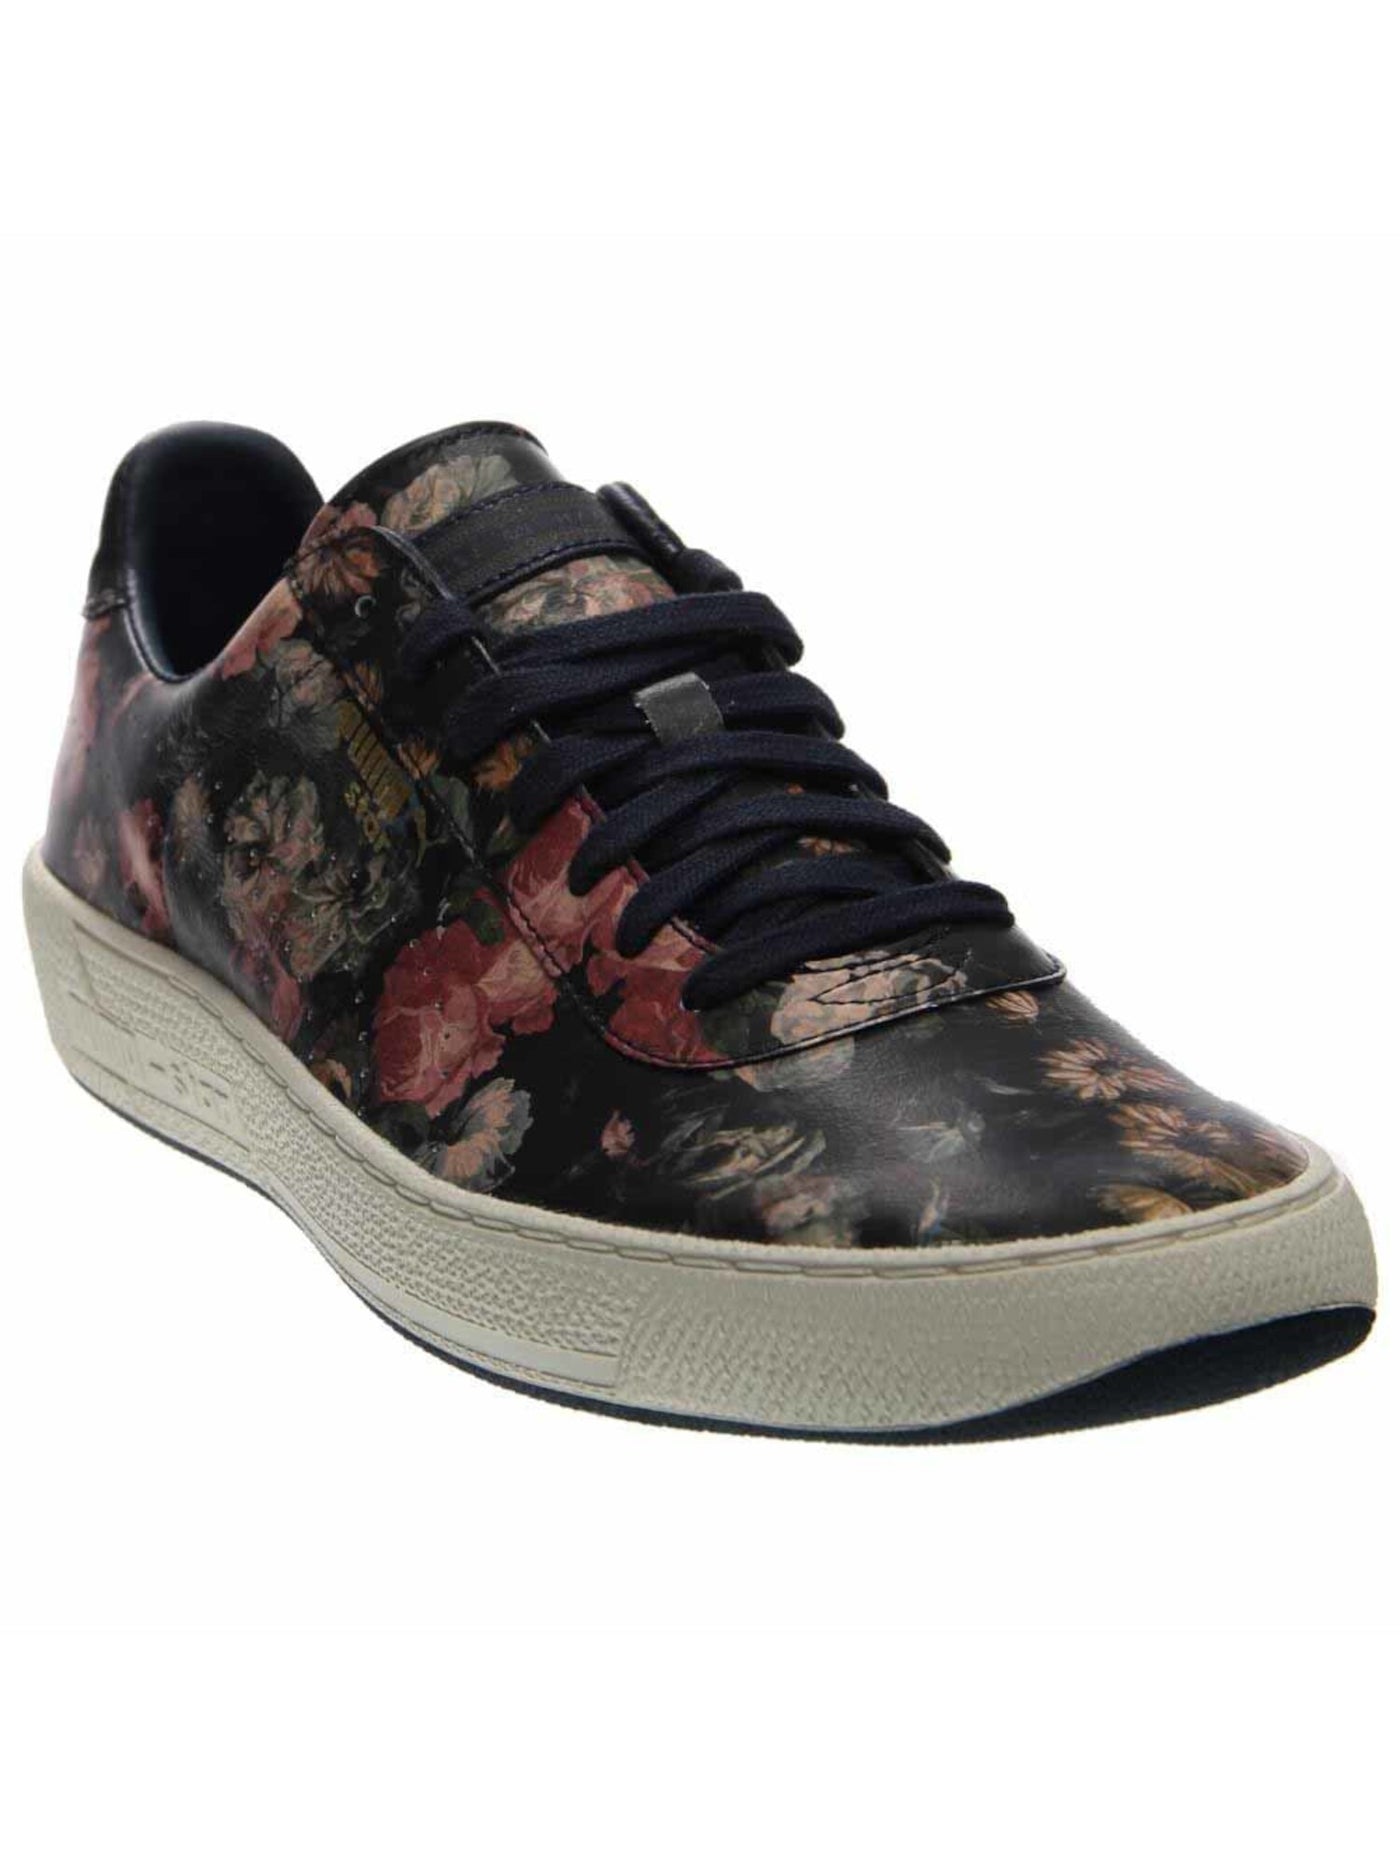 PUMA Mens Black Floral Logo Comfort Star X Round Toe Wedge Lace-Up Leather Athletic Sneakers Shoes 5